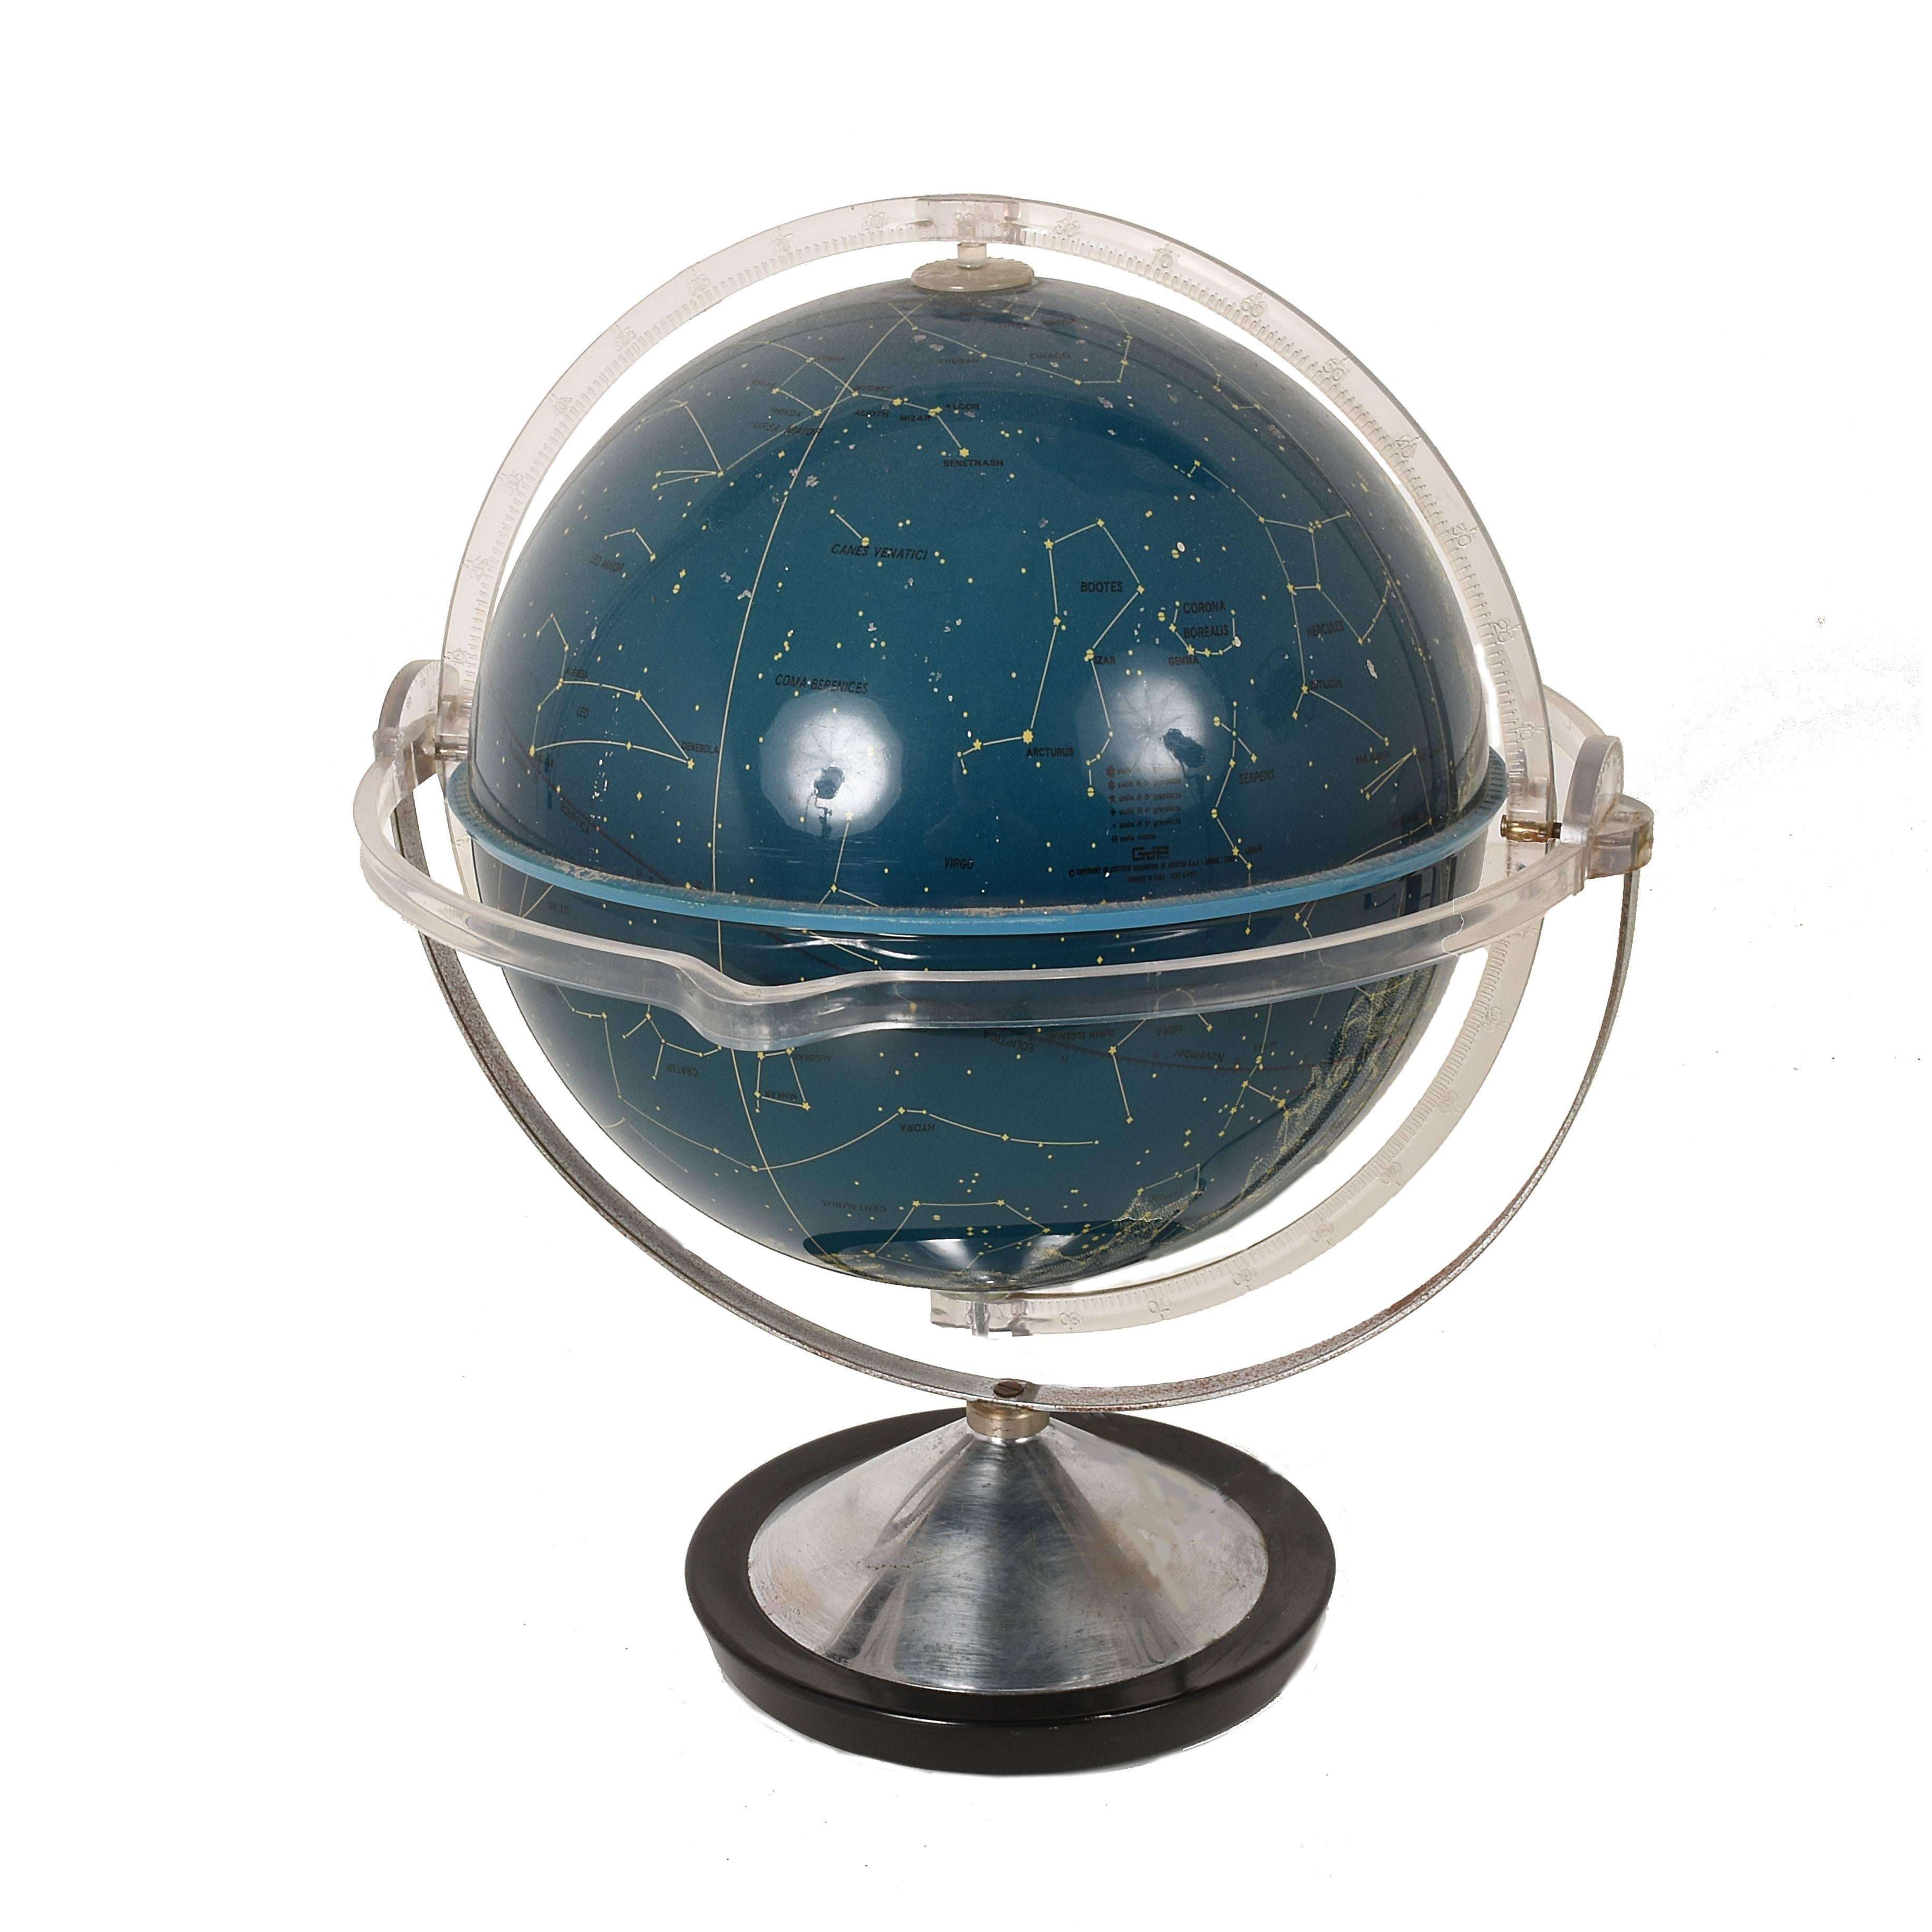 Vintage globe in dark blue with charted stars and constellations; it's even more fascinating if you keep the (working) light on.
 